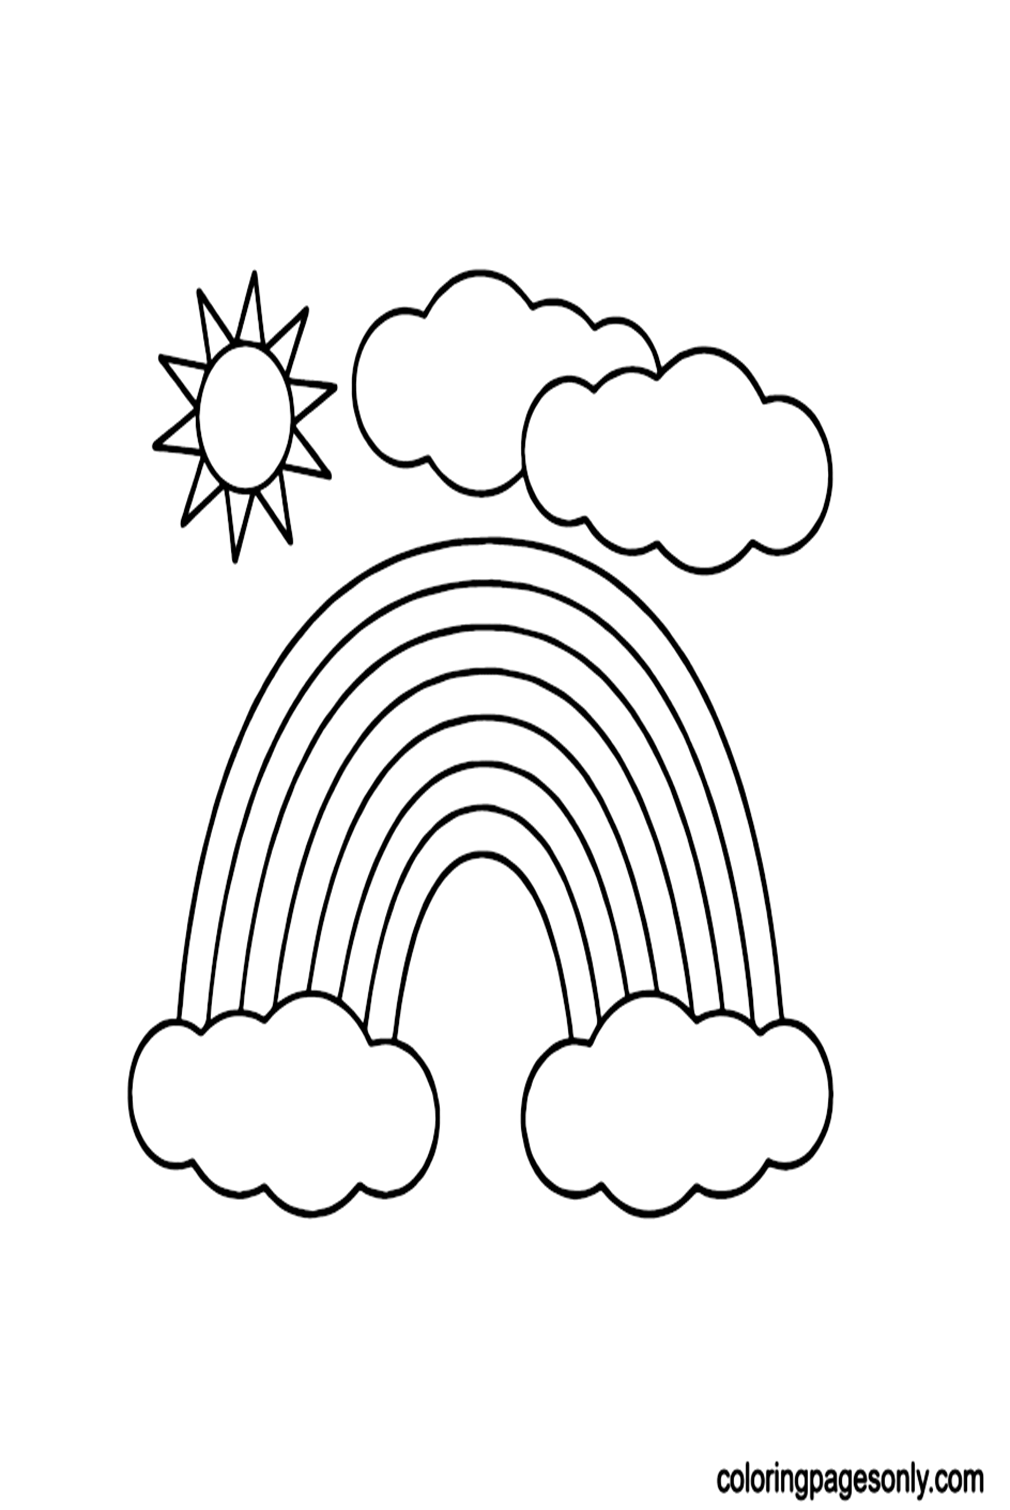 Sun Coloring Pages - Coloring Pages For Kids And Adults